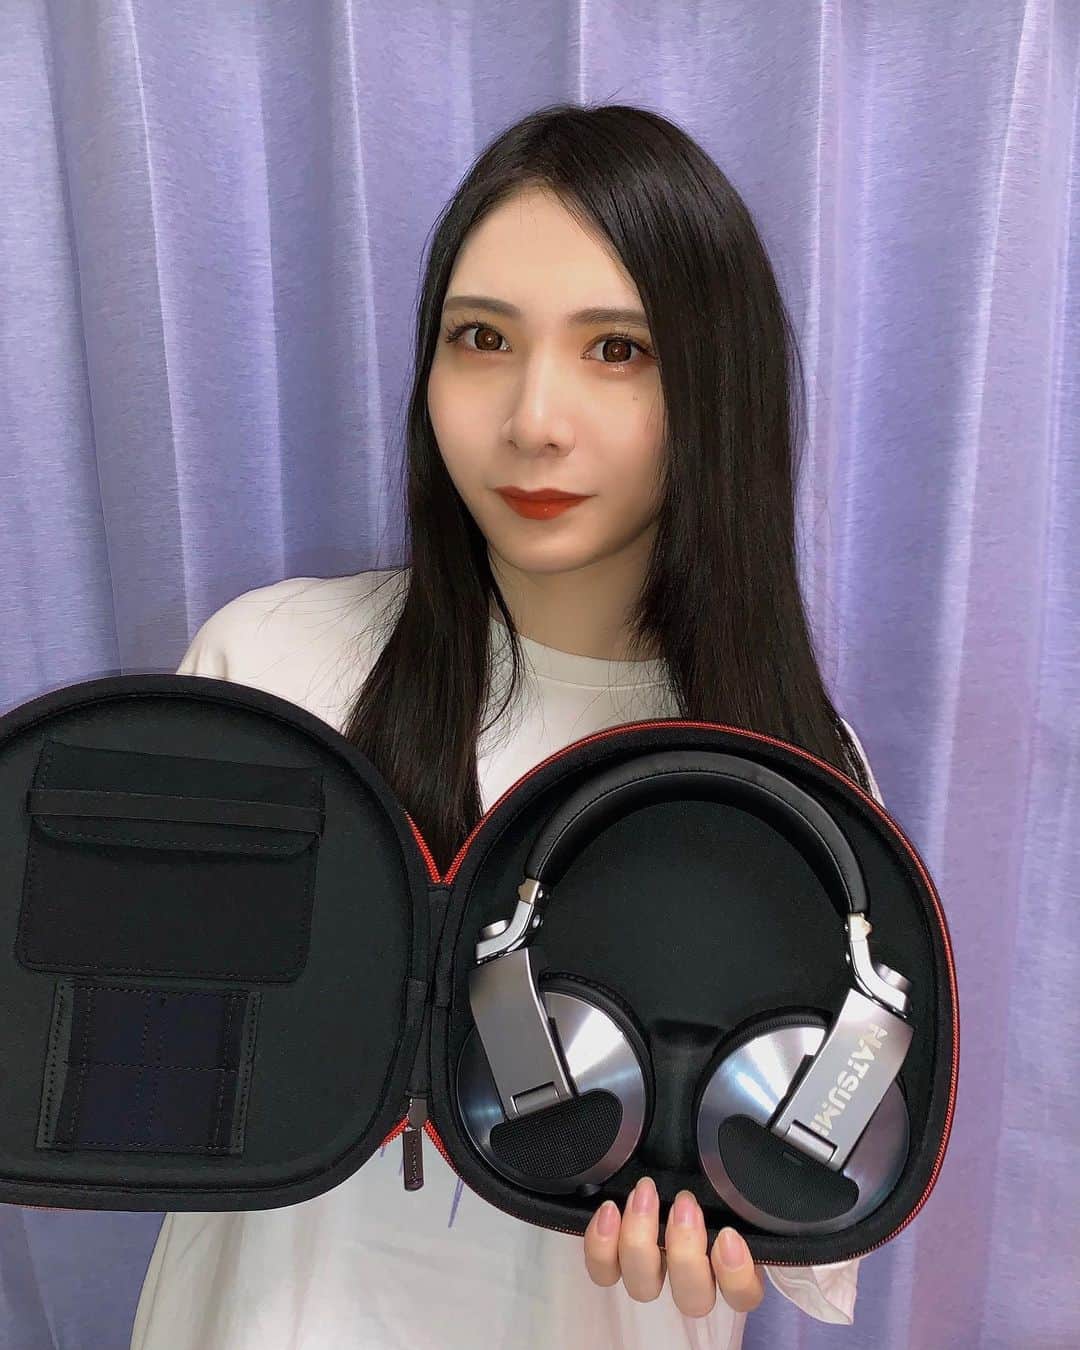 DJ NATSUMIのインスタグラム：「🎧🎧 Thank you💜 @pioneerdjglobal @pioneerdjjpn  I received a pair of headphones with the "NATSUMI" logo from Pioneer DJ. . This is the prize for winning the @djanemagjapan 2020 AWARD. Thank you so much.🙏 . By the way, when I won first place in Japan for the MCF DJ Audition 2019, I also received the same headphones from Pioneer DJ. This is the second one I've received.🎧🎧 . Pioneer DJ 様からHDJ-X10 ロゴ入りヘッドフォン🎧いただきました🙏 DJ ane MAG Japan 2020 AWARD 日本一位の賞品です💫嬉しい(°▽°) ちなみにMusic Circus 2019 DJオーディションで日本一位の時も同じ物 いただいたので2個目！ありがとうございます！ .」